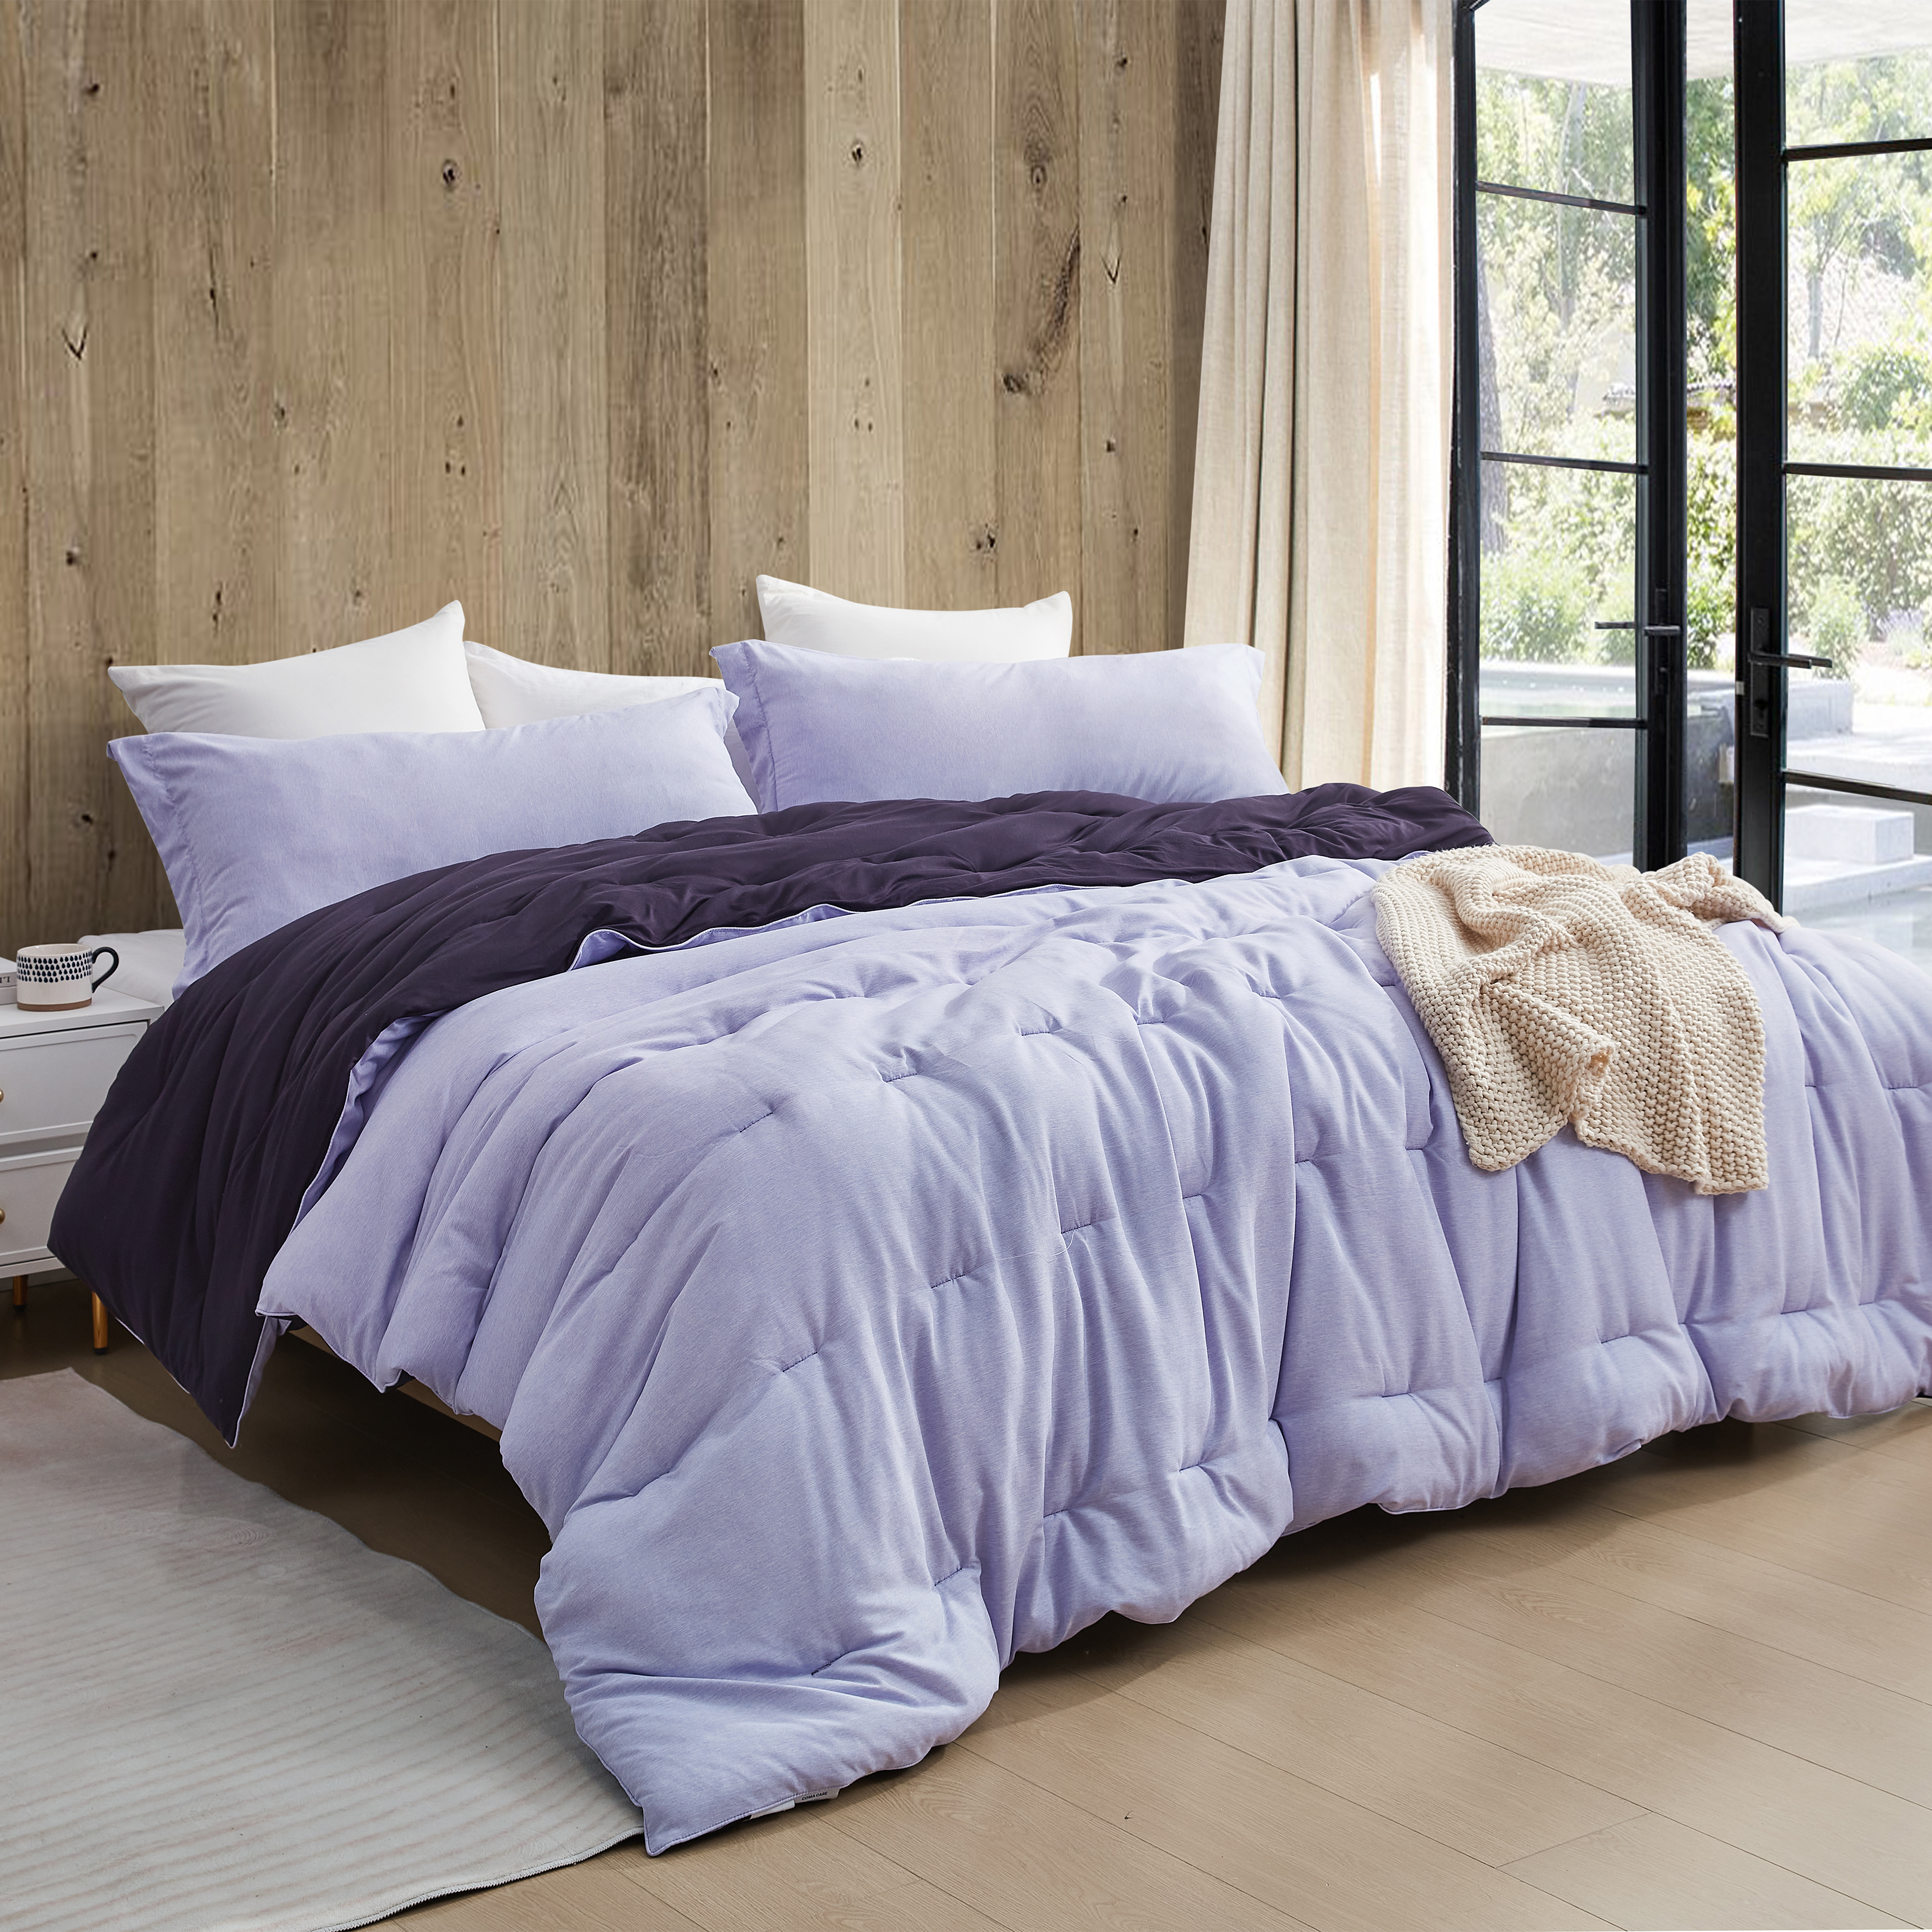 Yoga Pants - Coma Inducer® Oversized Cooling Comforter - Sweet Lavender x Midnight Purple